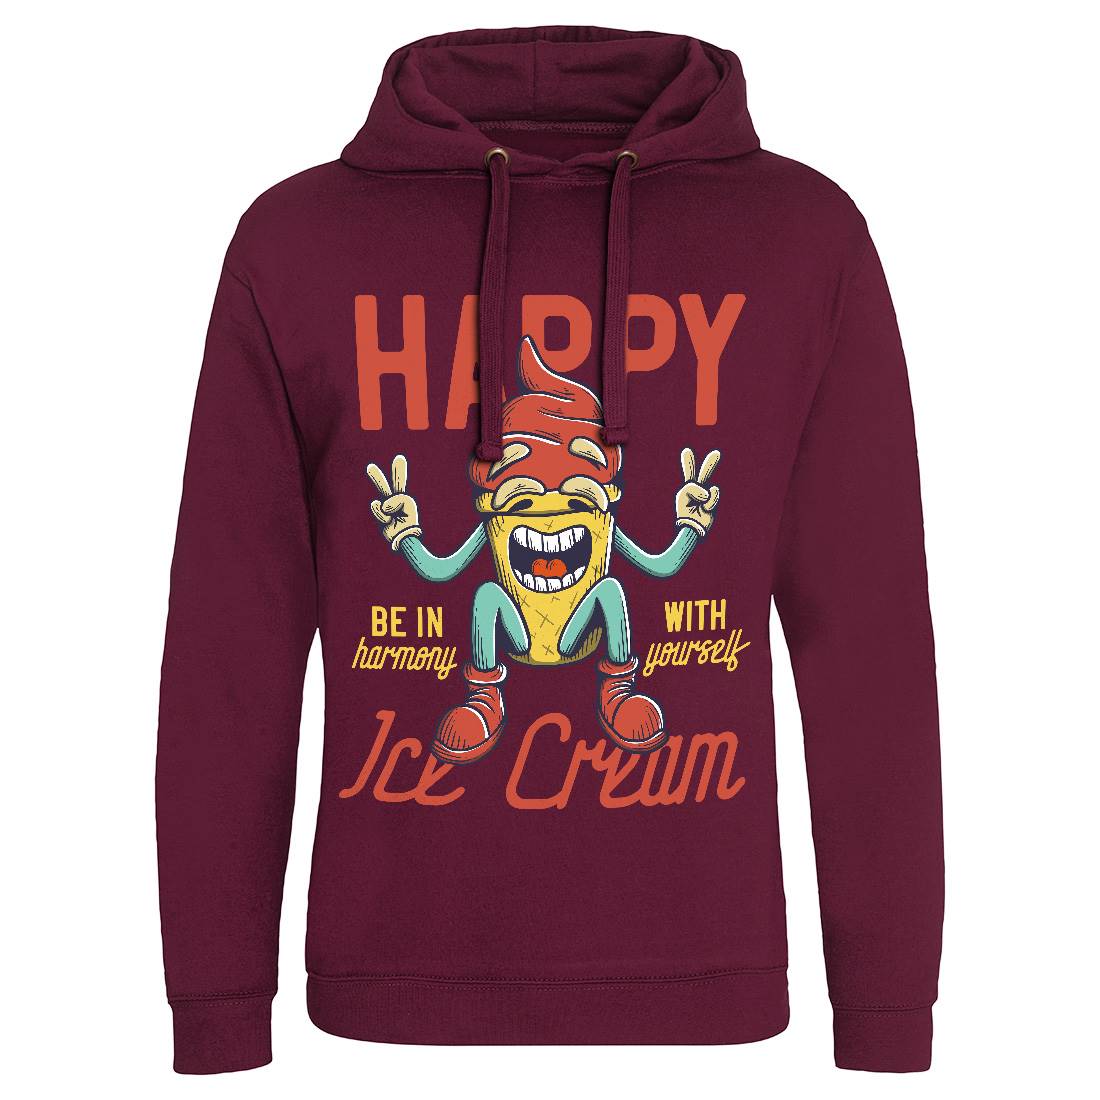 Happy Ice Cream Mens Hoodie Without Pocket Food D940